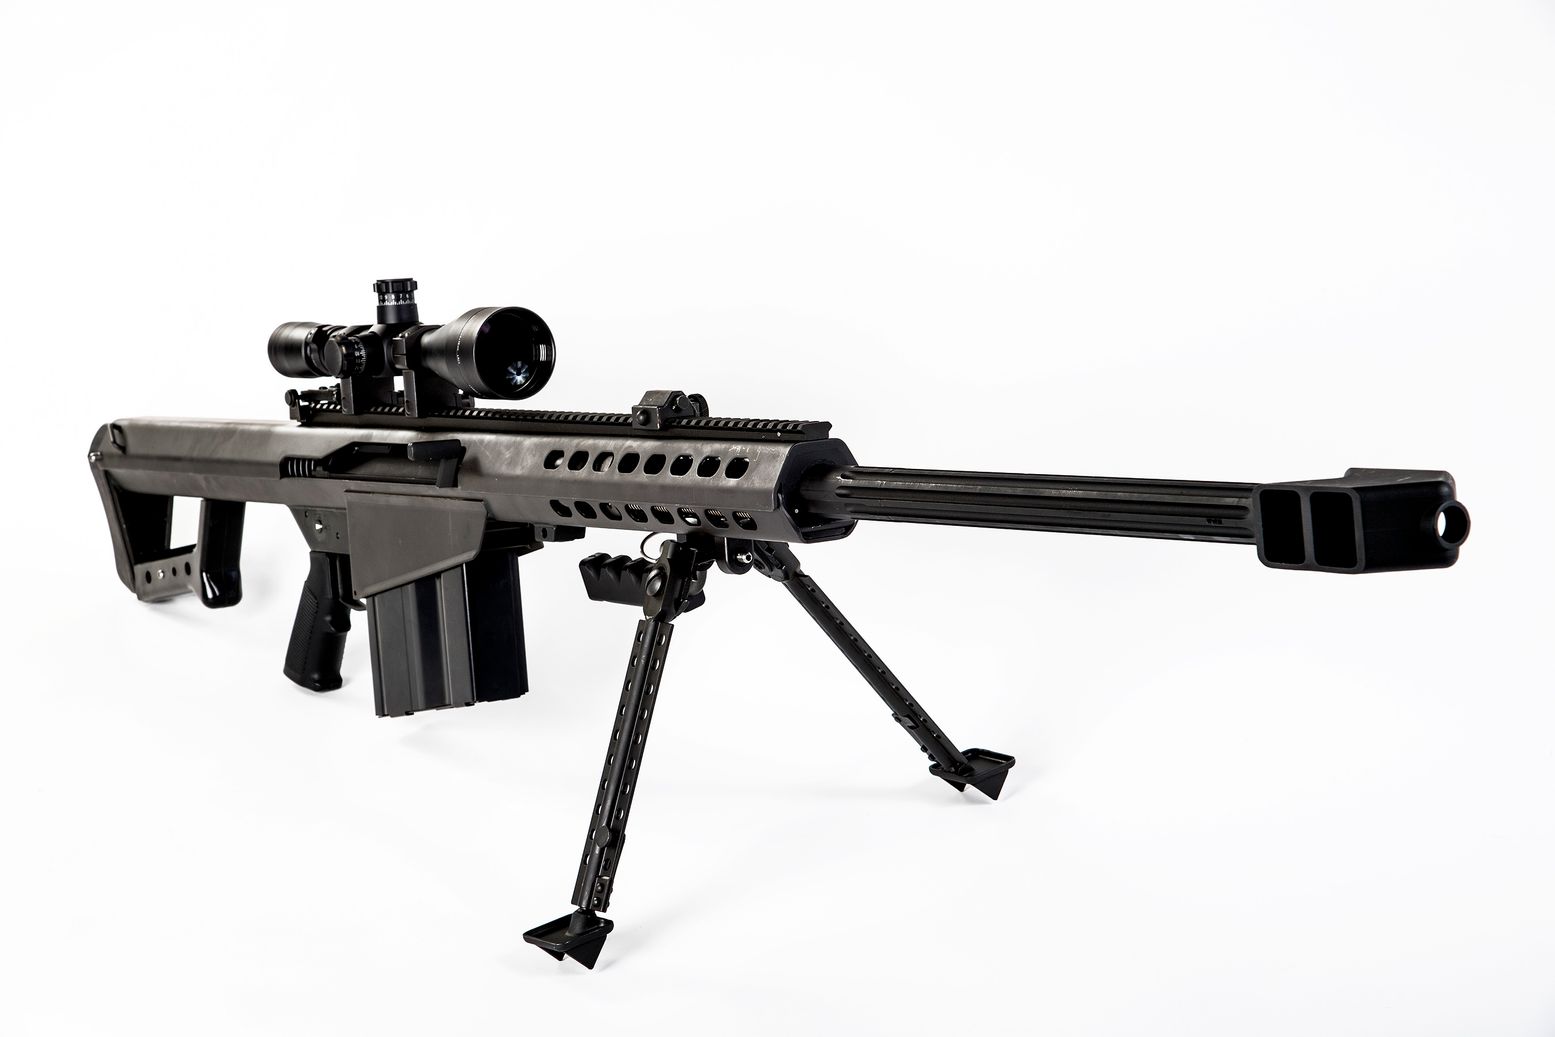 2,000 Yards Away: The M82 Sniper Rifle Has an Amazing Range | The